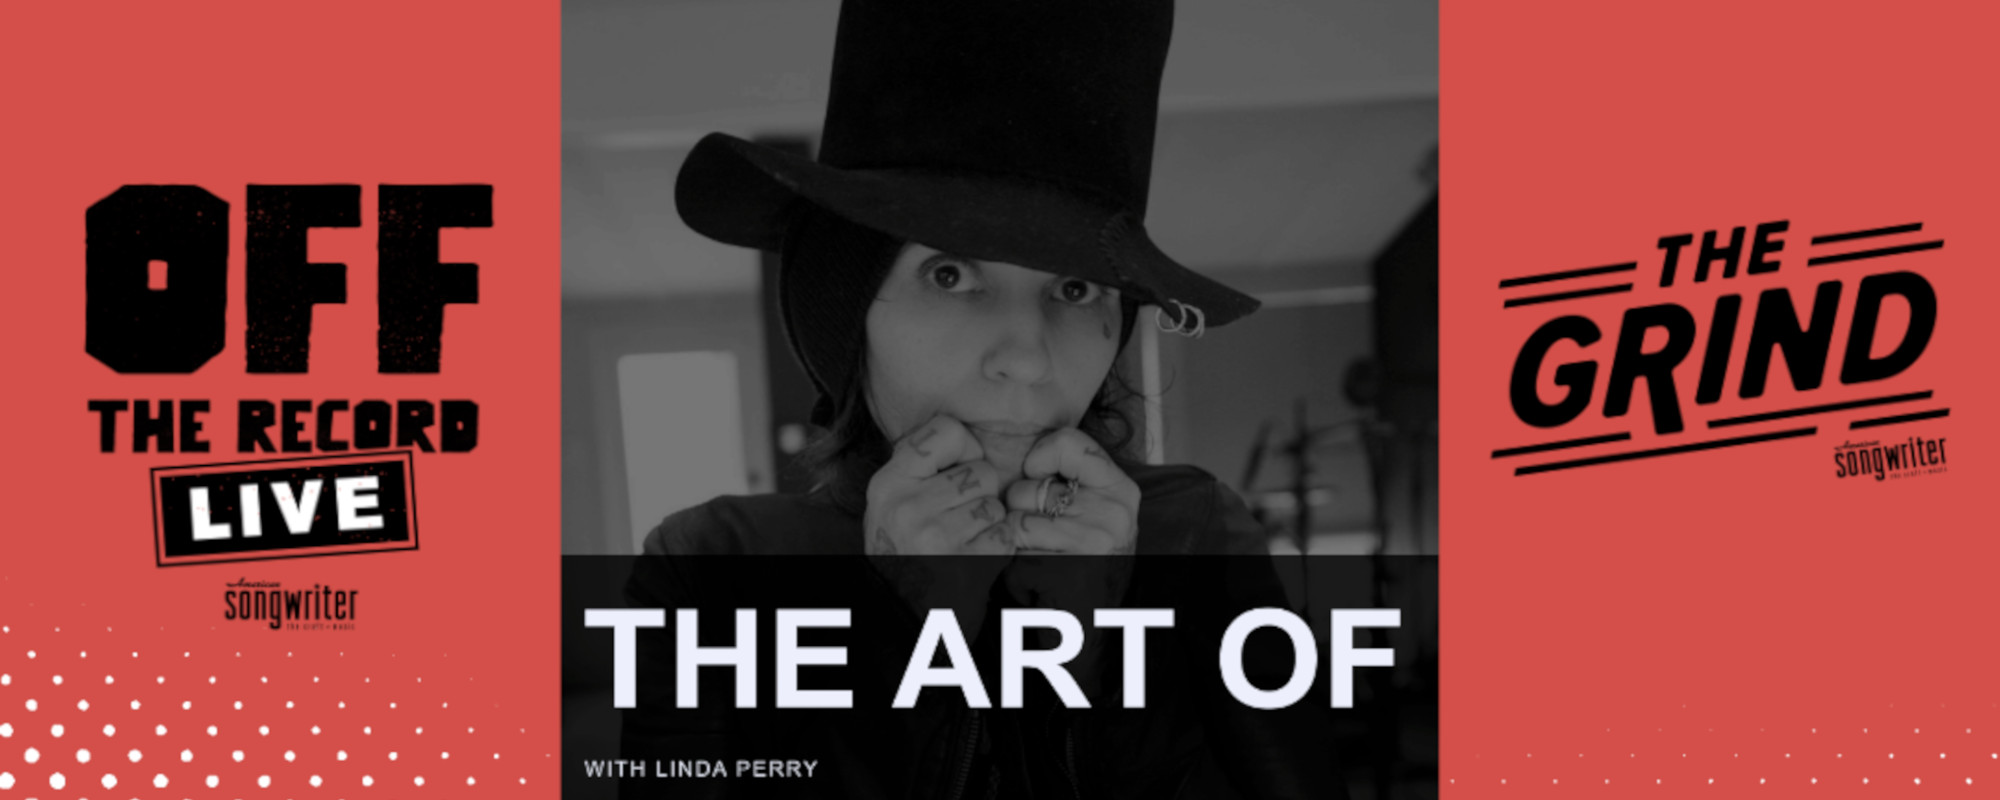 American Songwriter Partners with Twitch to Launch Livestreaming Music Channel with Linda Perry Series and More